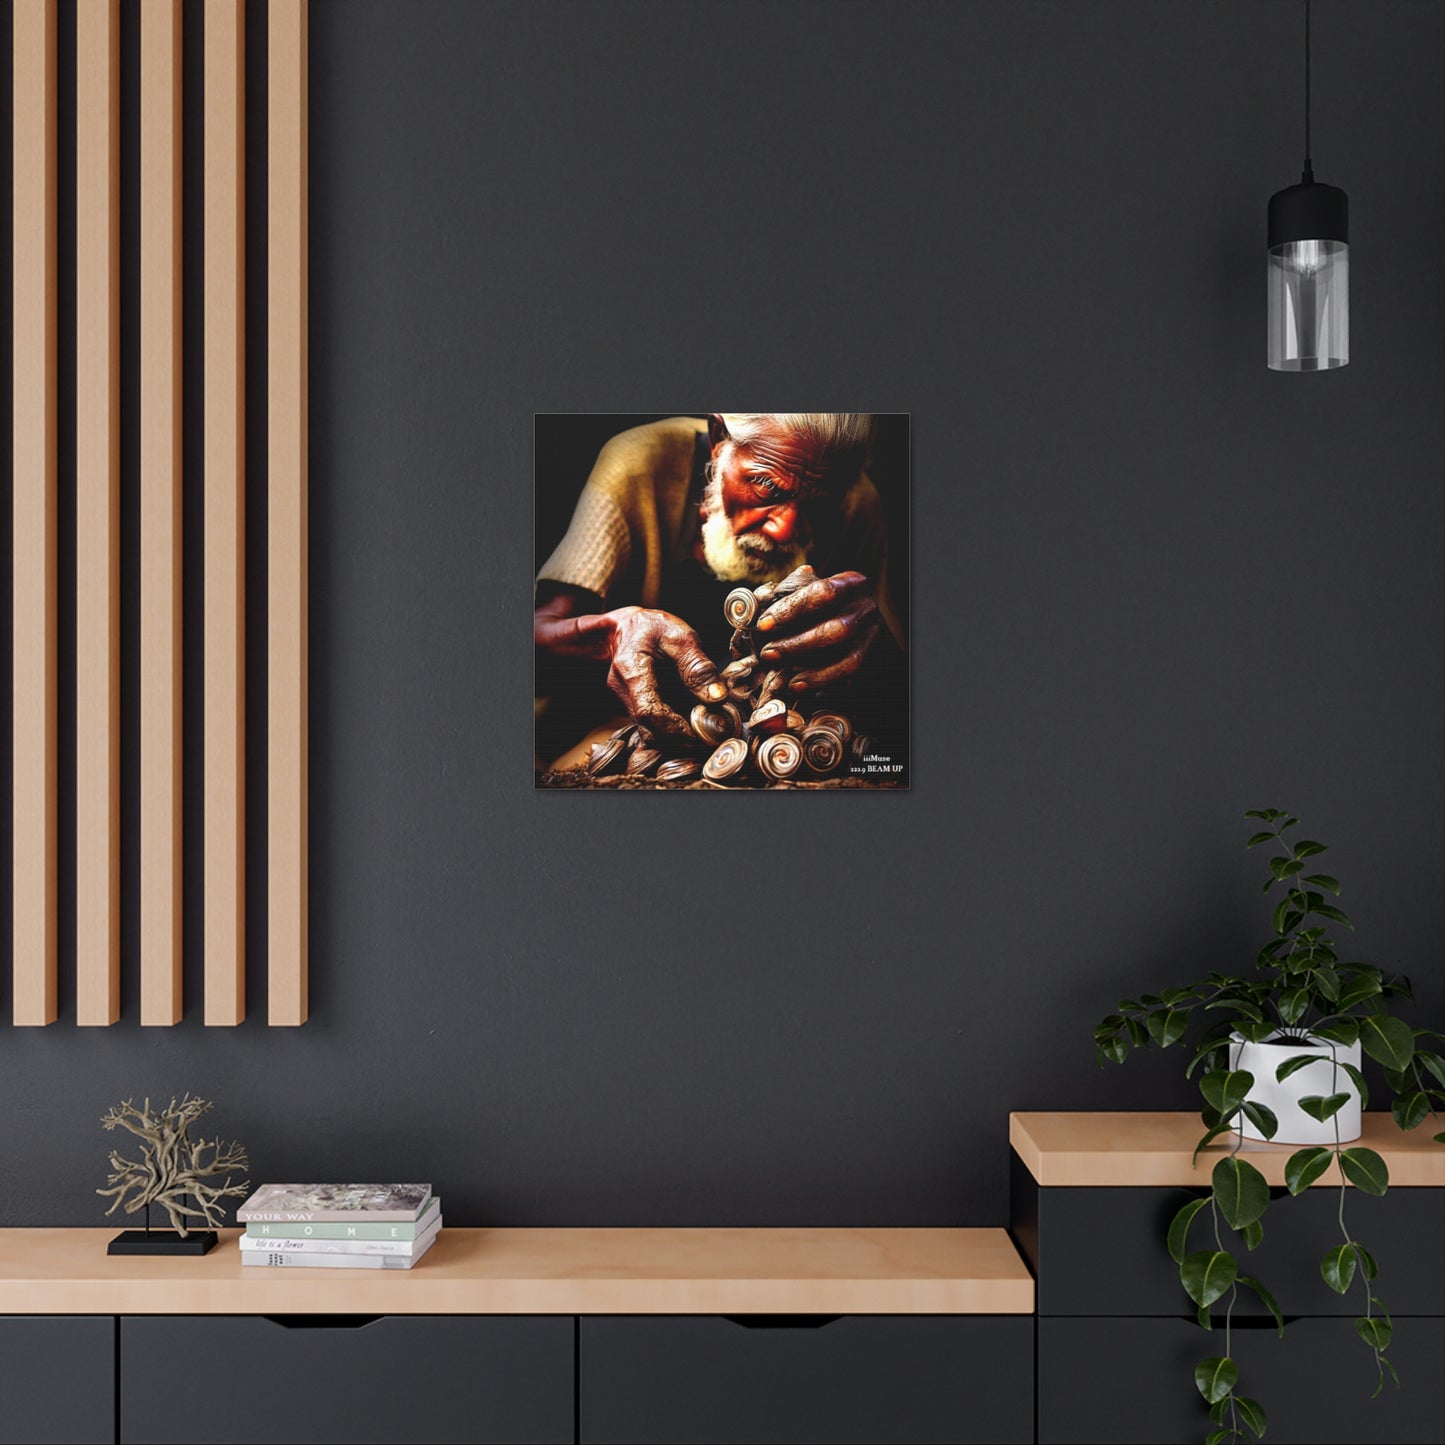 Obatala in Real Time 2- A Gallery Canvas